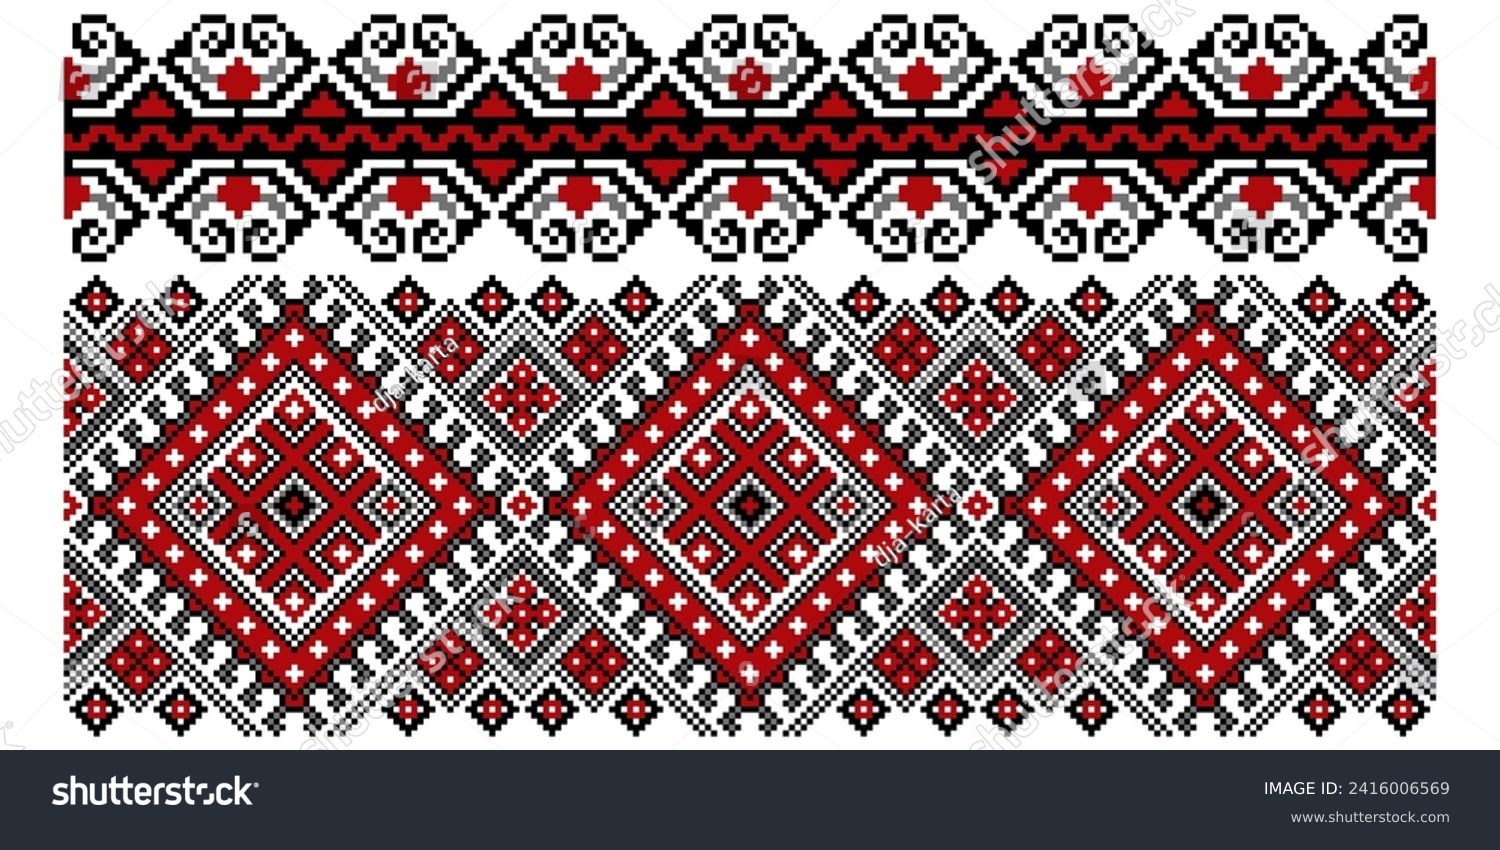 SVG of Set of editable colorful seamless ethnic Ukrainian traditional cross stitch patterns for embroidery stitch. Floral and geometric ornaments. svg